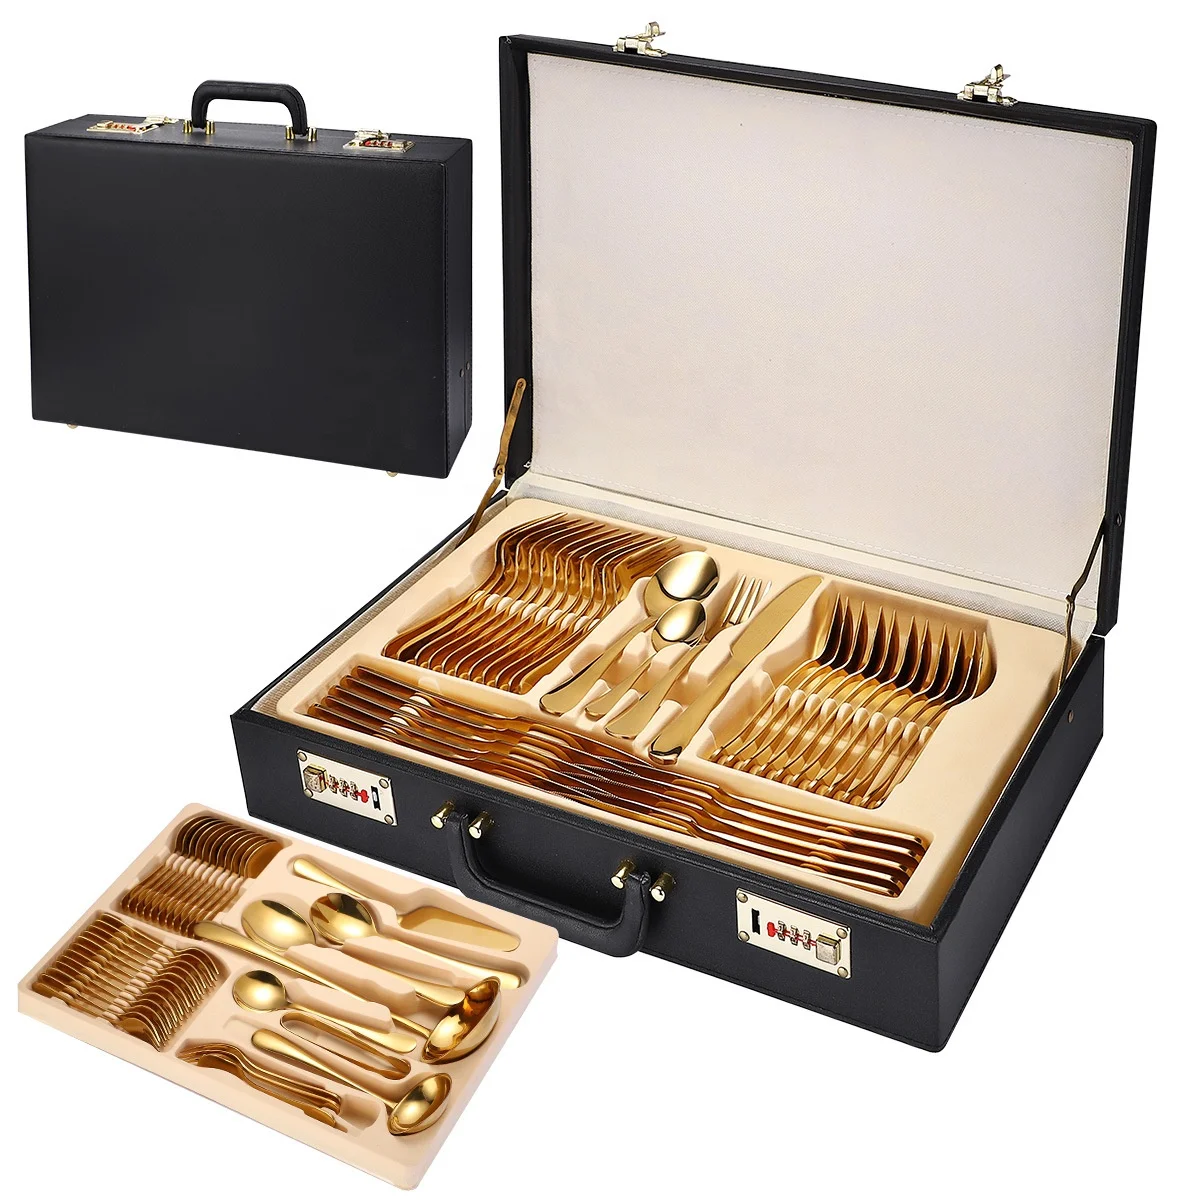 

Wholesale 48/72/84 piece Custom Stainless Steel Colorful Cutlery Flatware Dinnerware Gold Knives Spoons Forks Set With Case, As pictures shown